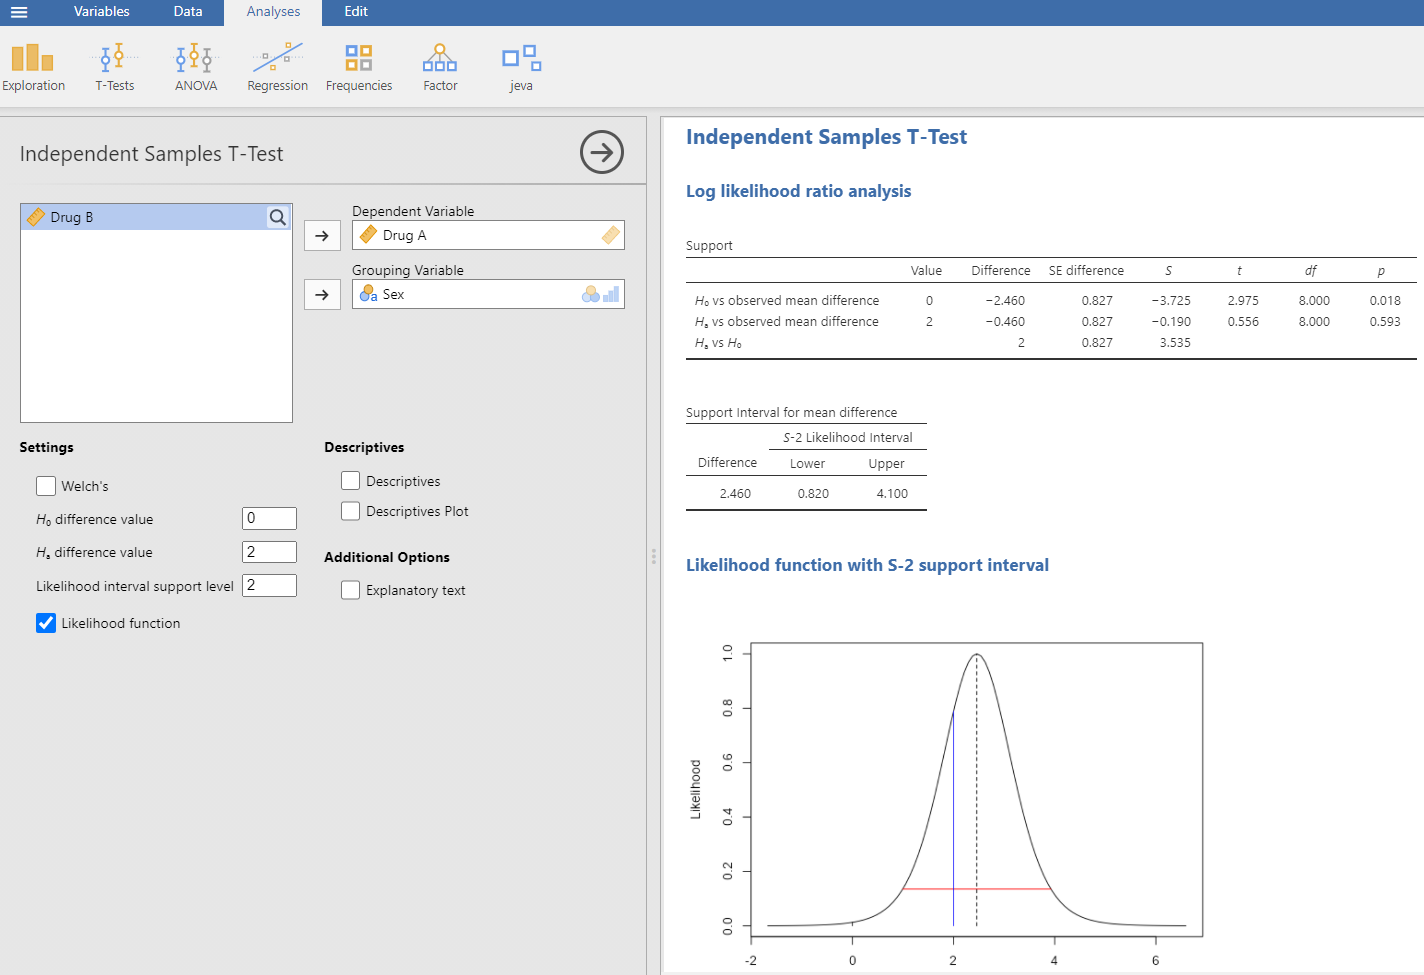 jeva analysis of 2 independent samples. The dialog box is on the left, where we select the data and options appropriate for our analysis. The output is on the right.